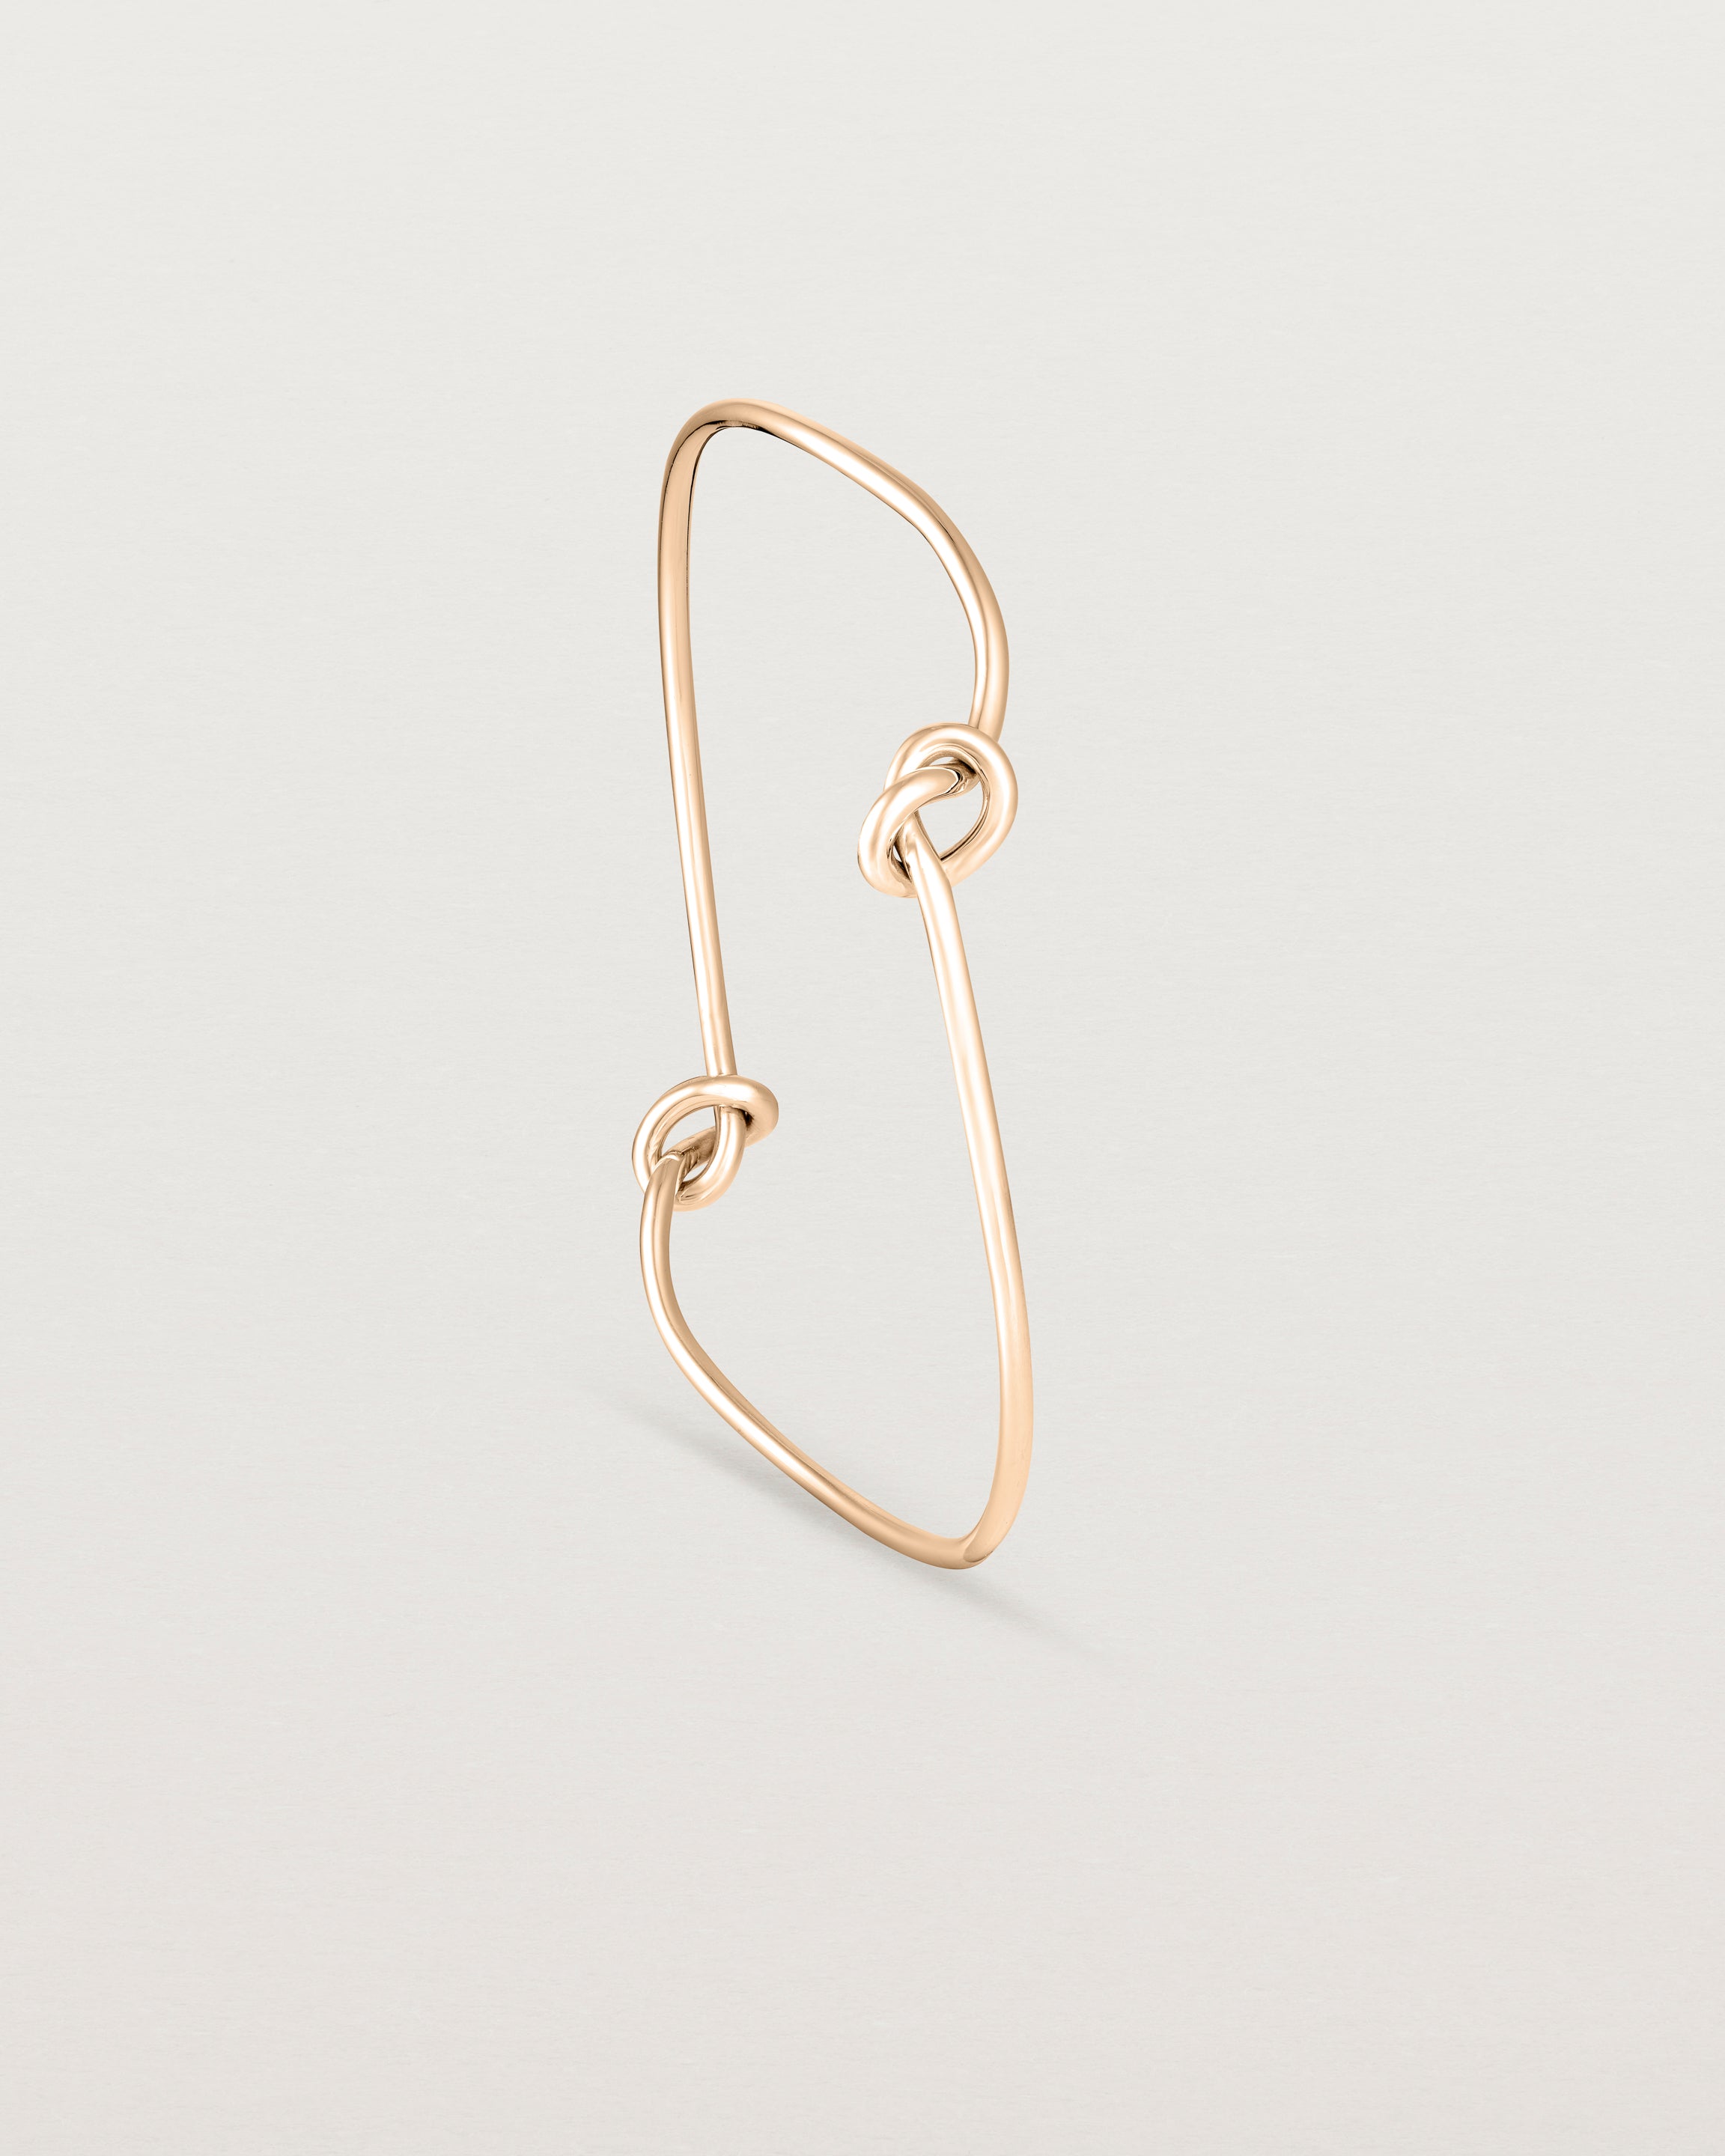 Standing view of the Dà anam Bangle in rose gold.